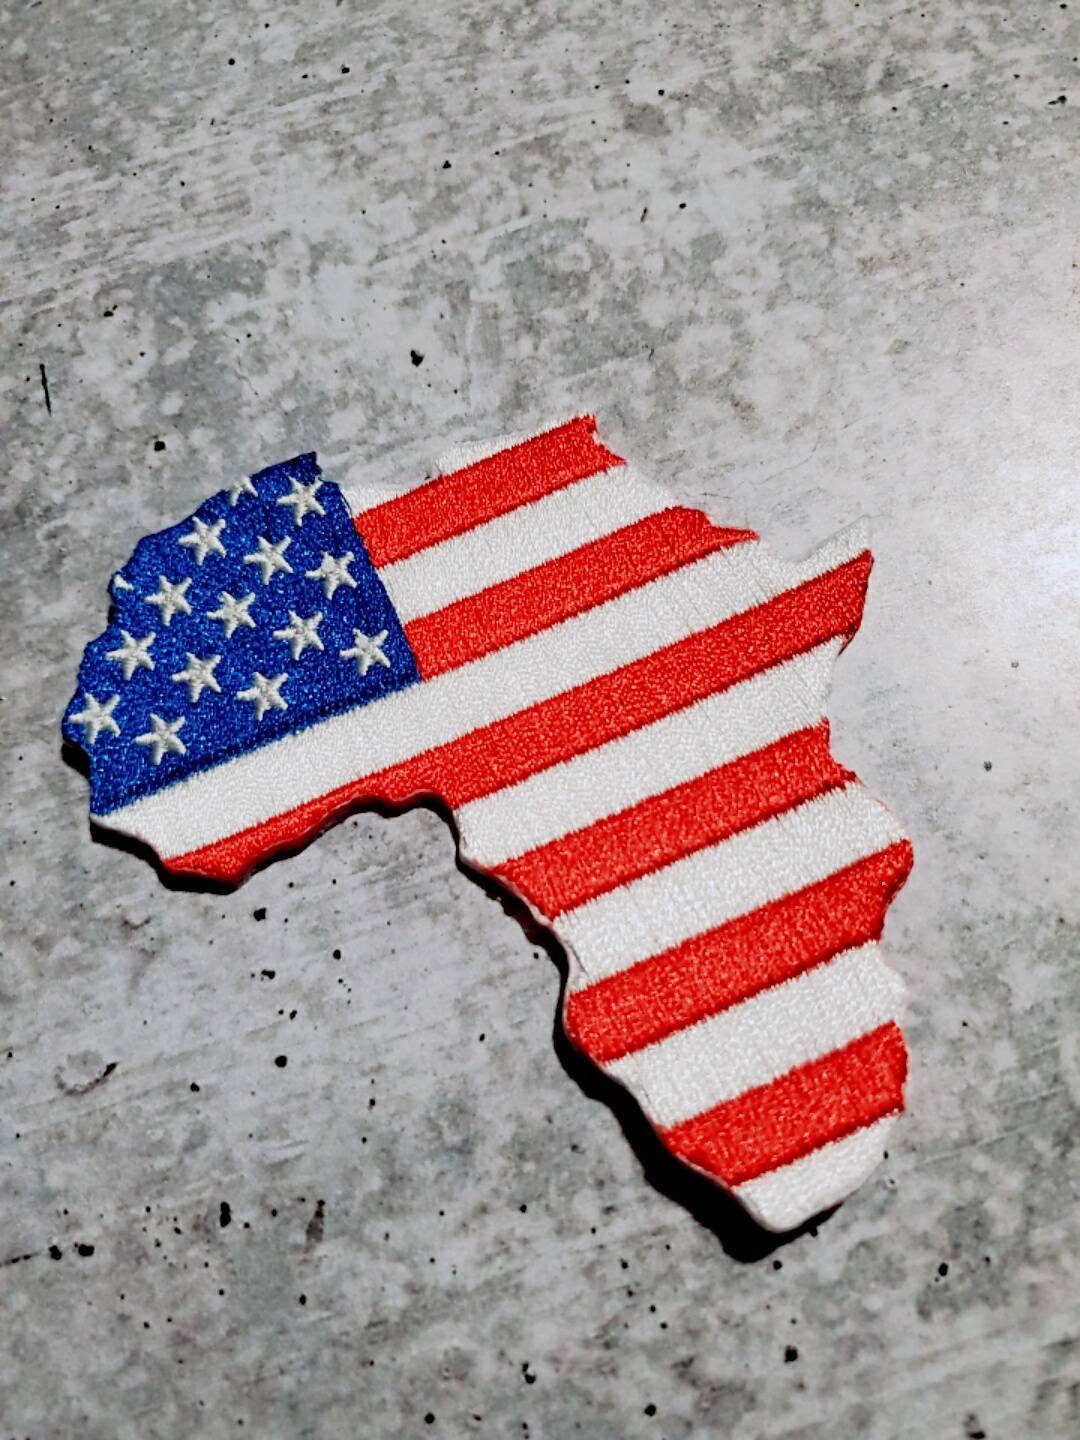 New "African-American Flag," Iron-On Embroidered Patch, Size 3.5", Collectable Appliques, DIY Crafts, BLM Gifts